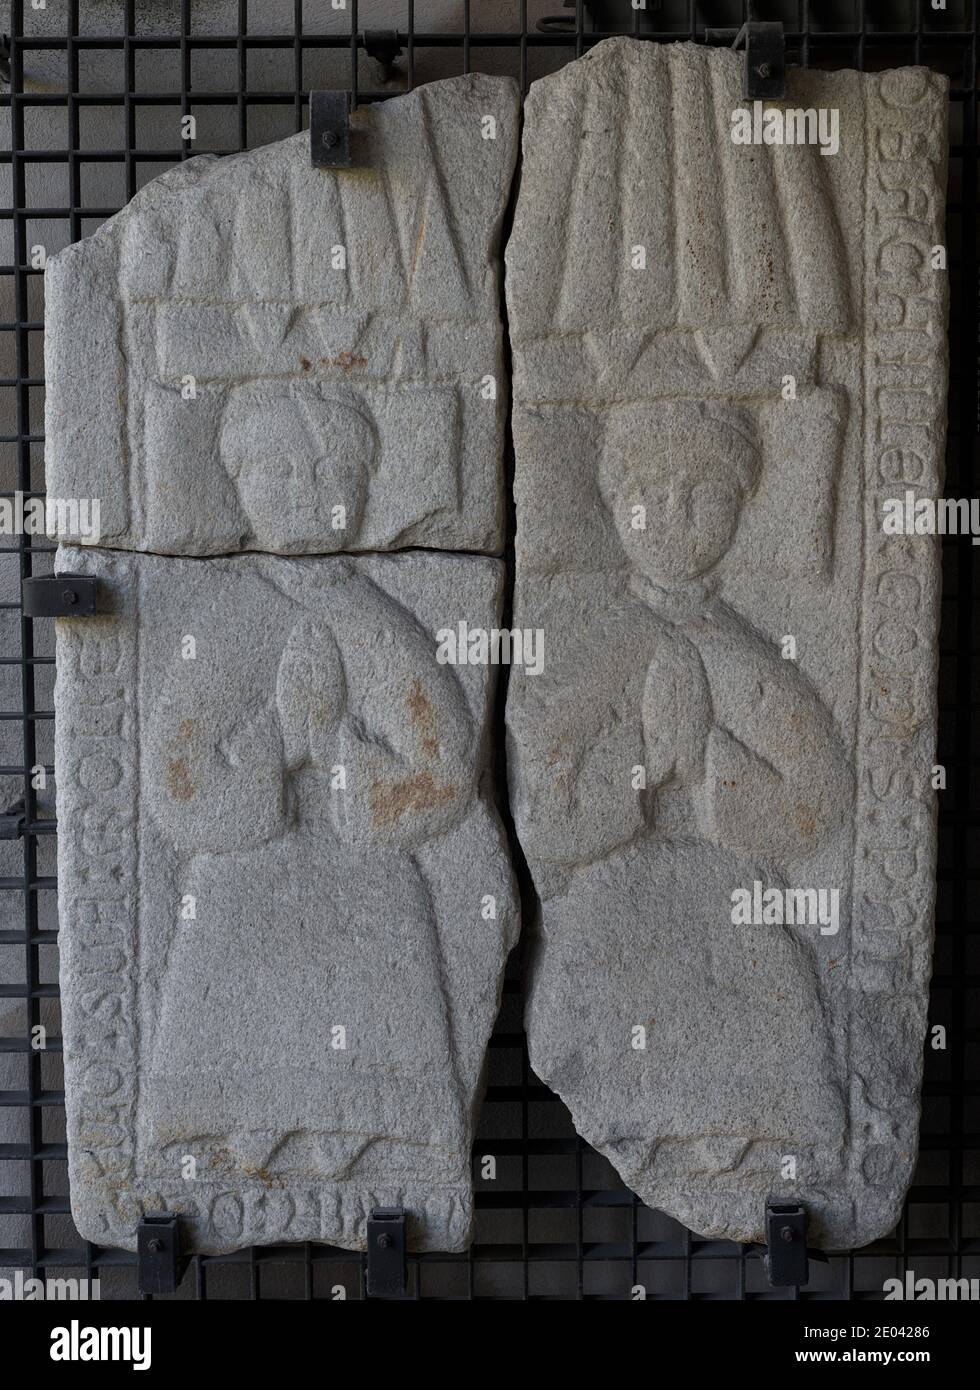 Tombstone with relief depicting two praying figures. 1400-1450. The upper part shows the marriage formed by Gomez Patiño and Maria de Galo to whom the tombstone belongs. In the lower part, their twin daughters. From the Convent of Santo Domingo (La Coruña, Galicia, Spain). Archaeological and History Museum of A Coruña (San Anton Castle). Galicia, Spain. Stock Photo